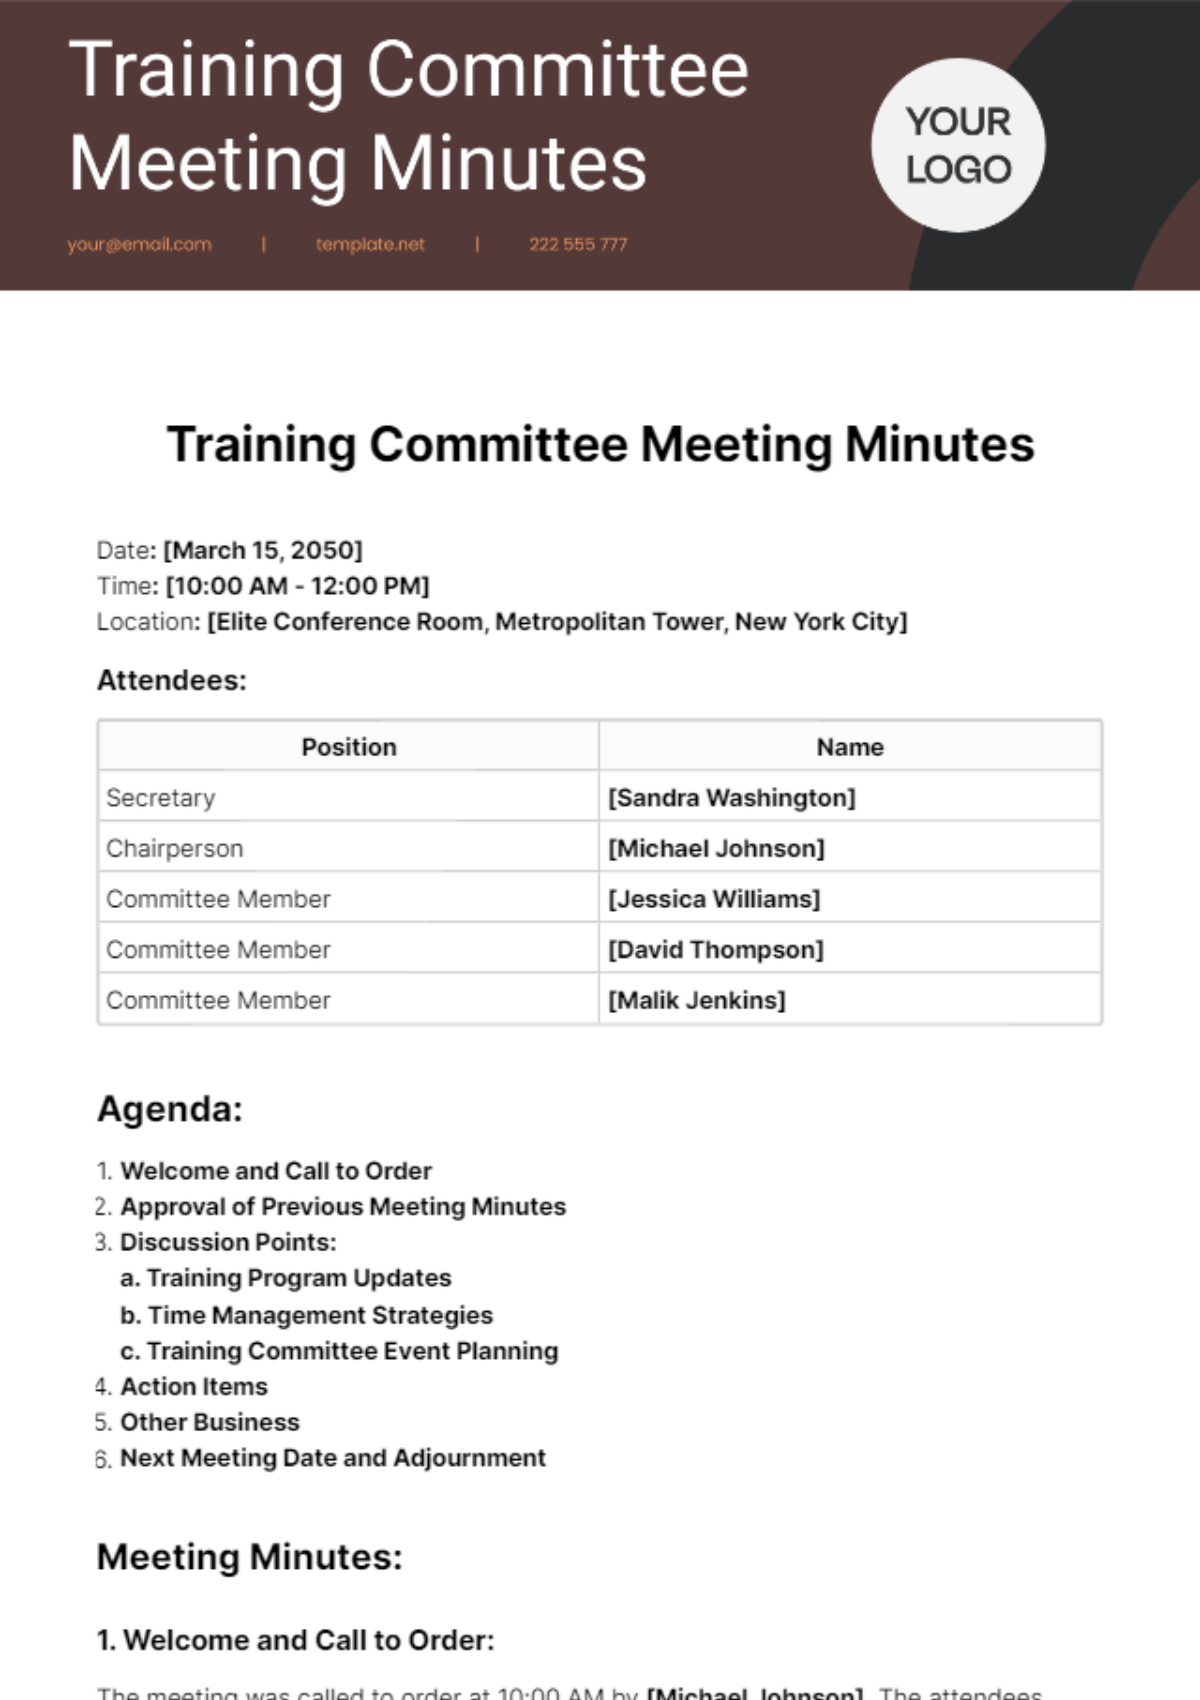 Training Committee Meeting Minutes Template